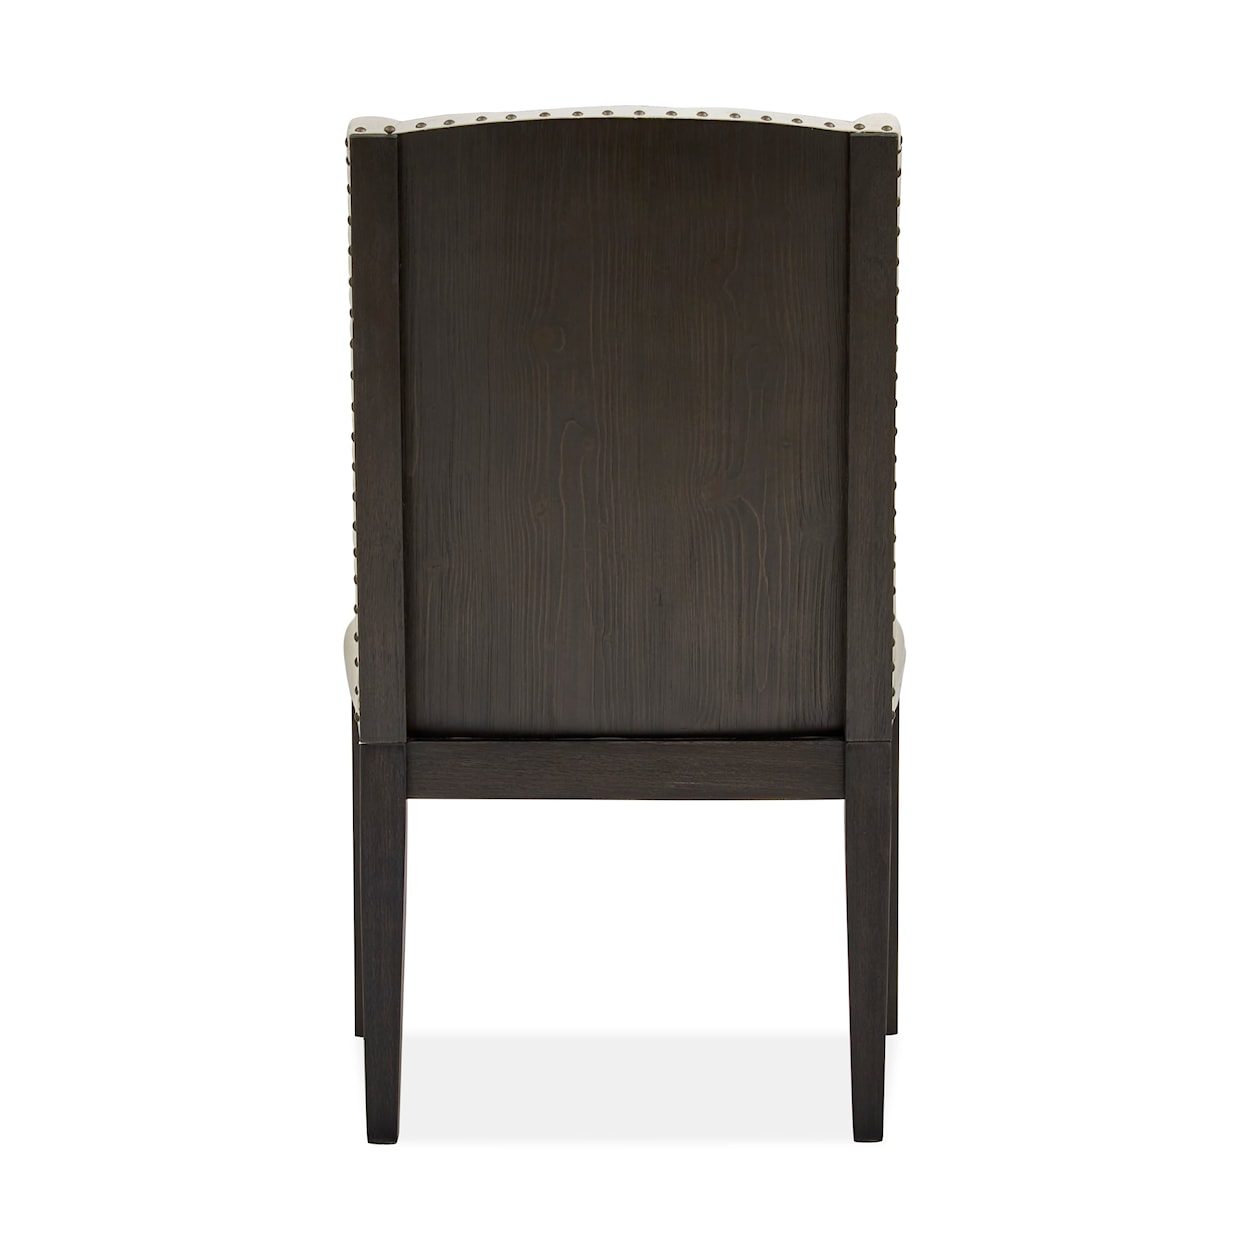 Magnussen Home Sierra Dining Upholstered Dining Side Chair